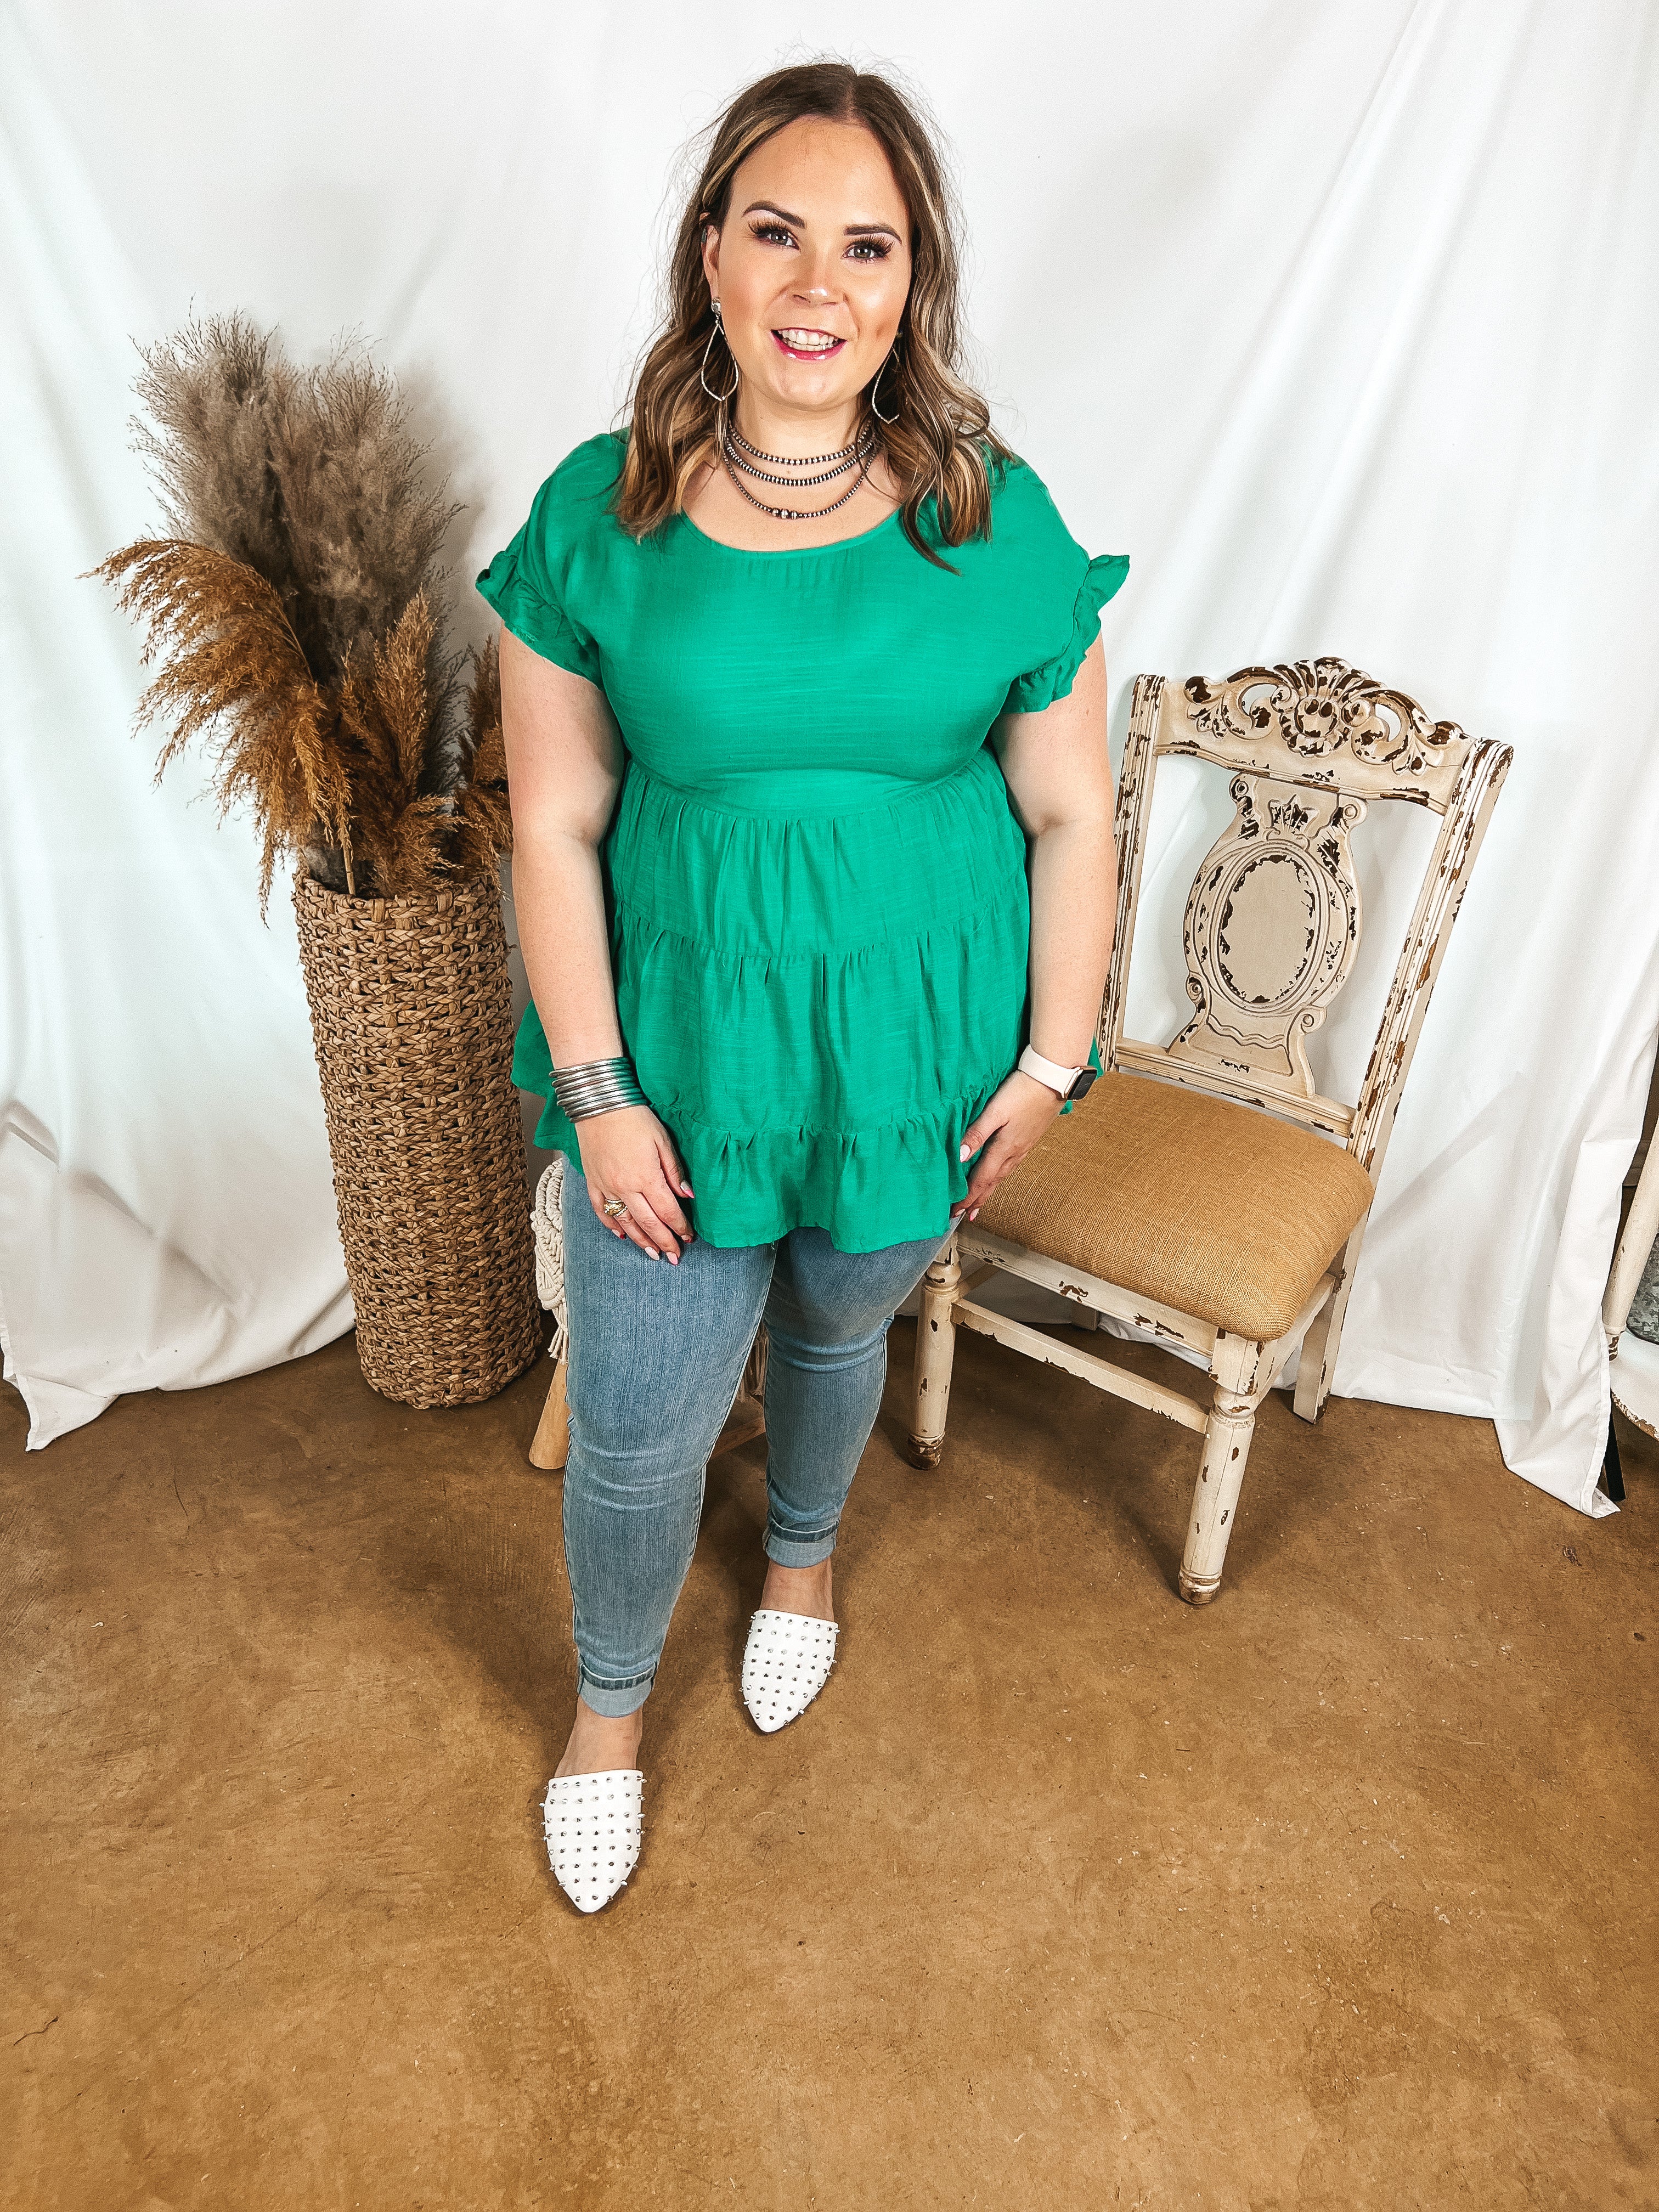 Belong To You Tiered Top with Ruffle Cap Sleeves in Emerald Green - Giddy Up Glamour Boutique